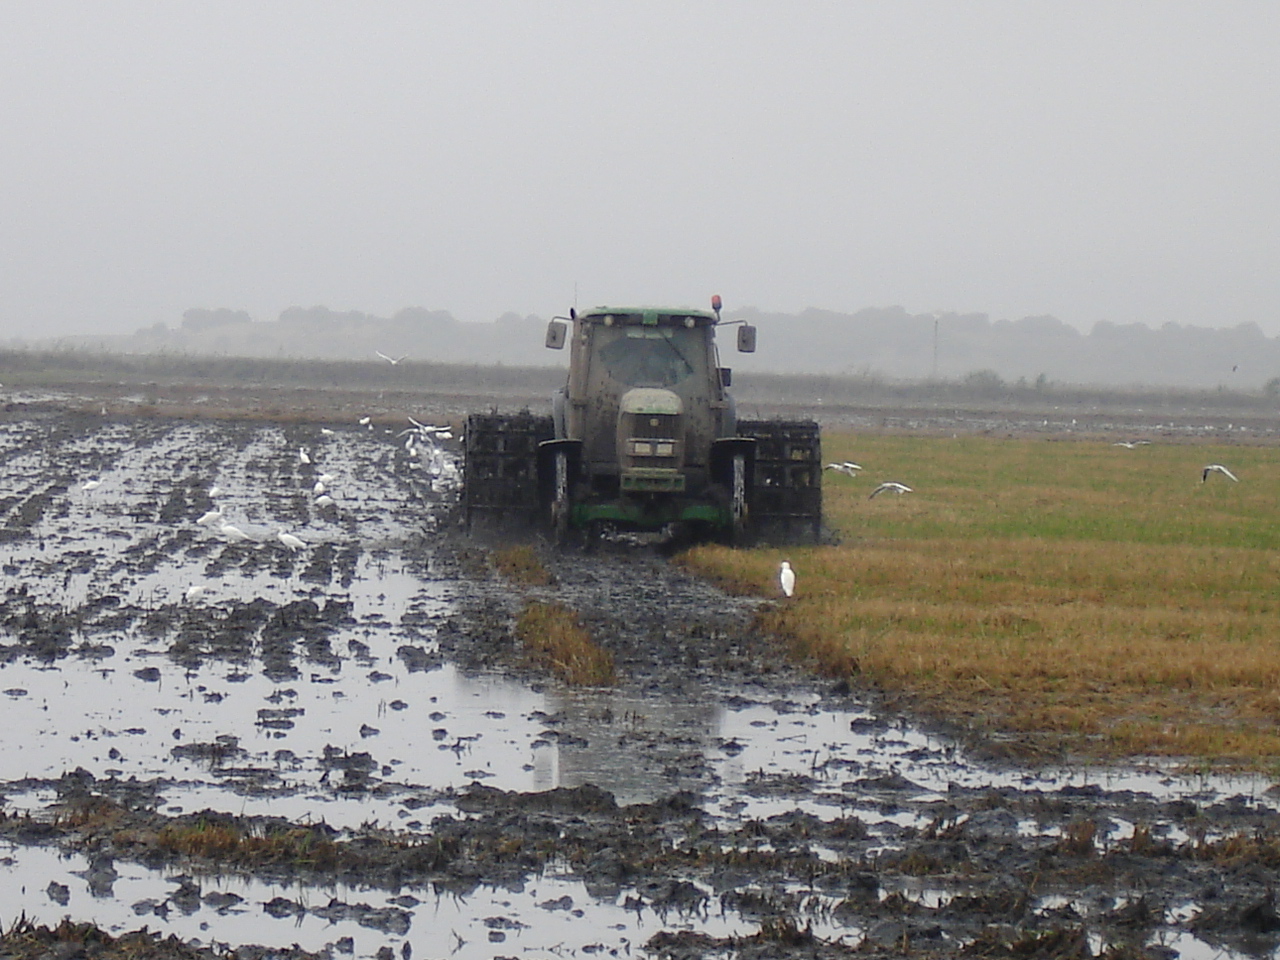 Site preparation at a rice field